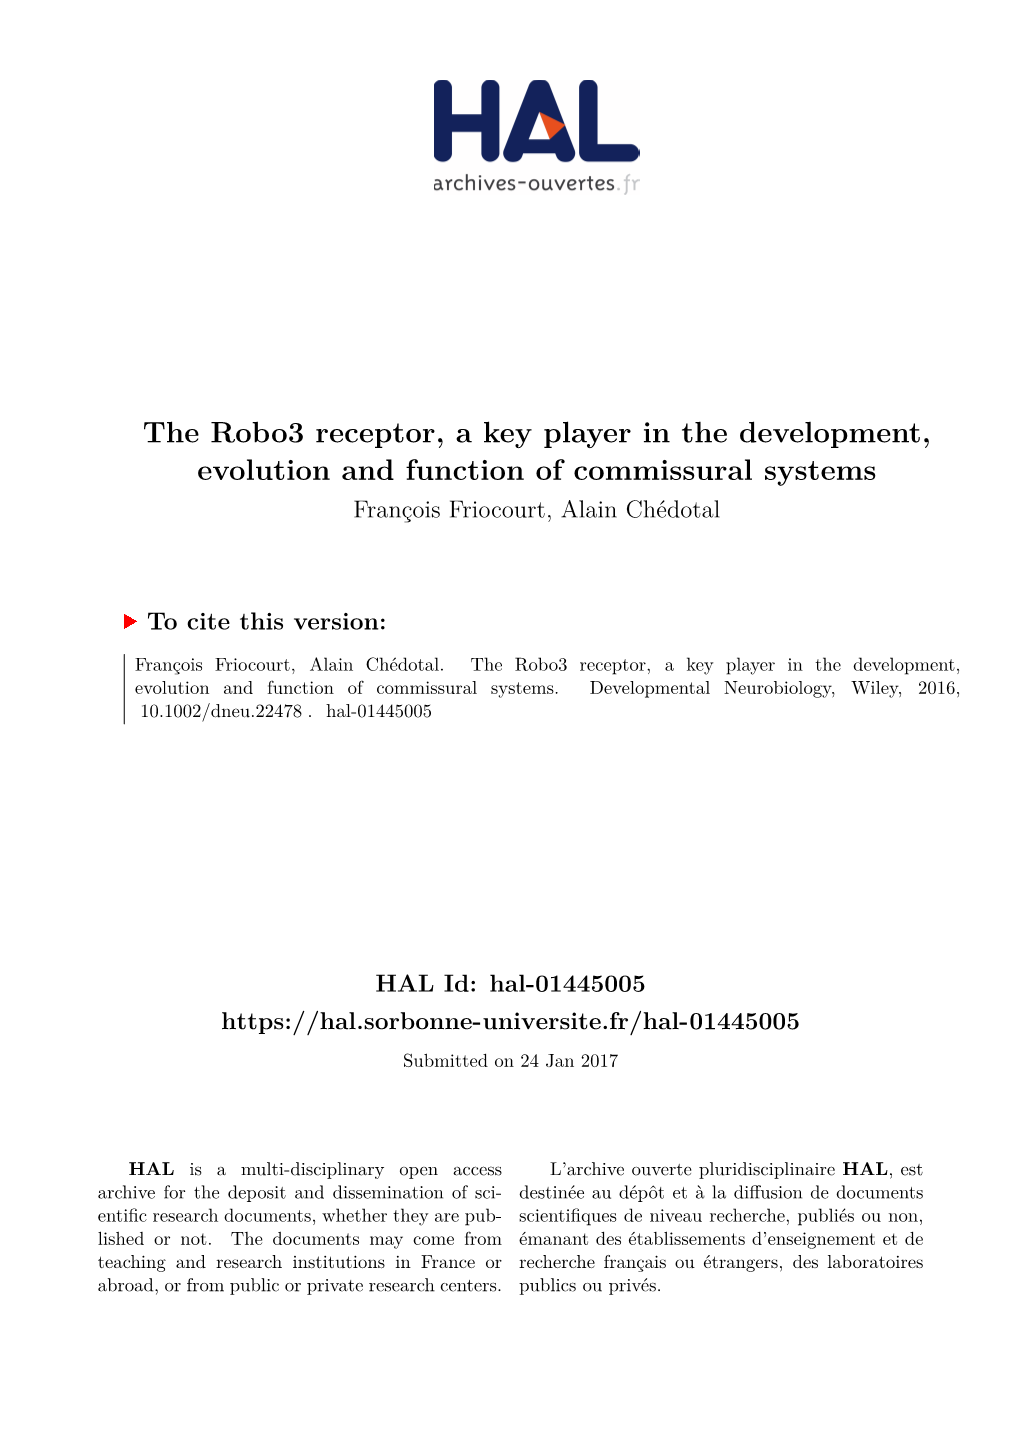 The Robo3 Receptor, a Key Player in the Development, Evolution and Function of Commissural Systems François Friocourt, Alain Chédotal